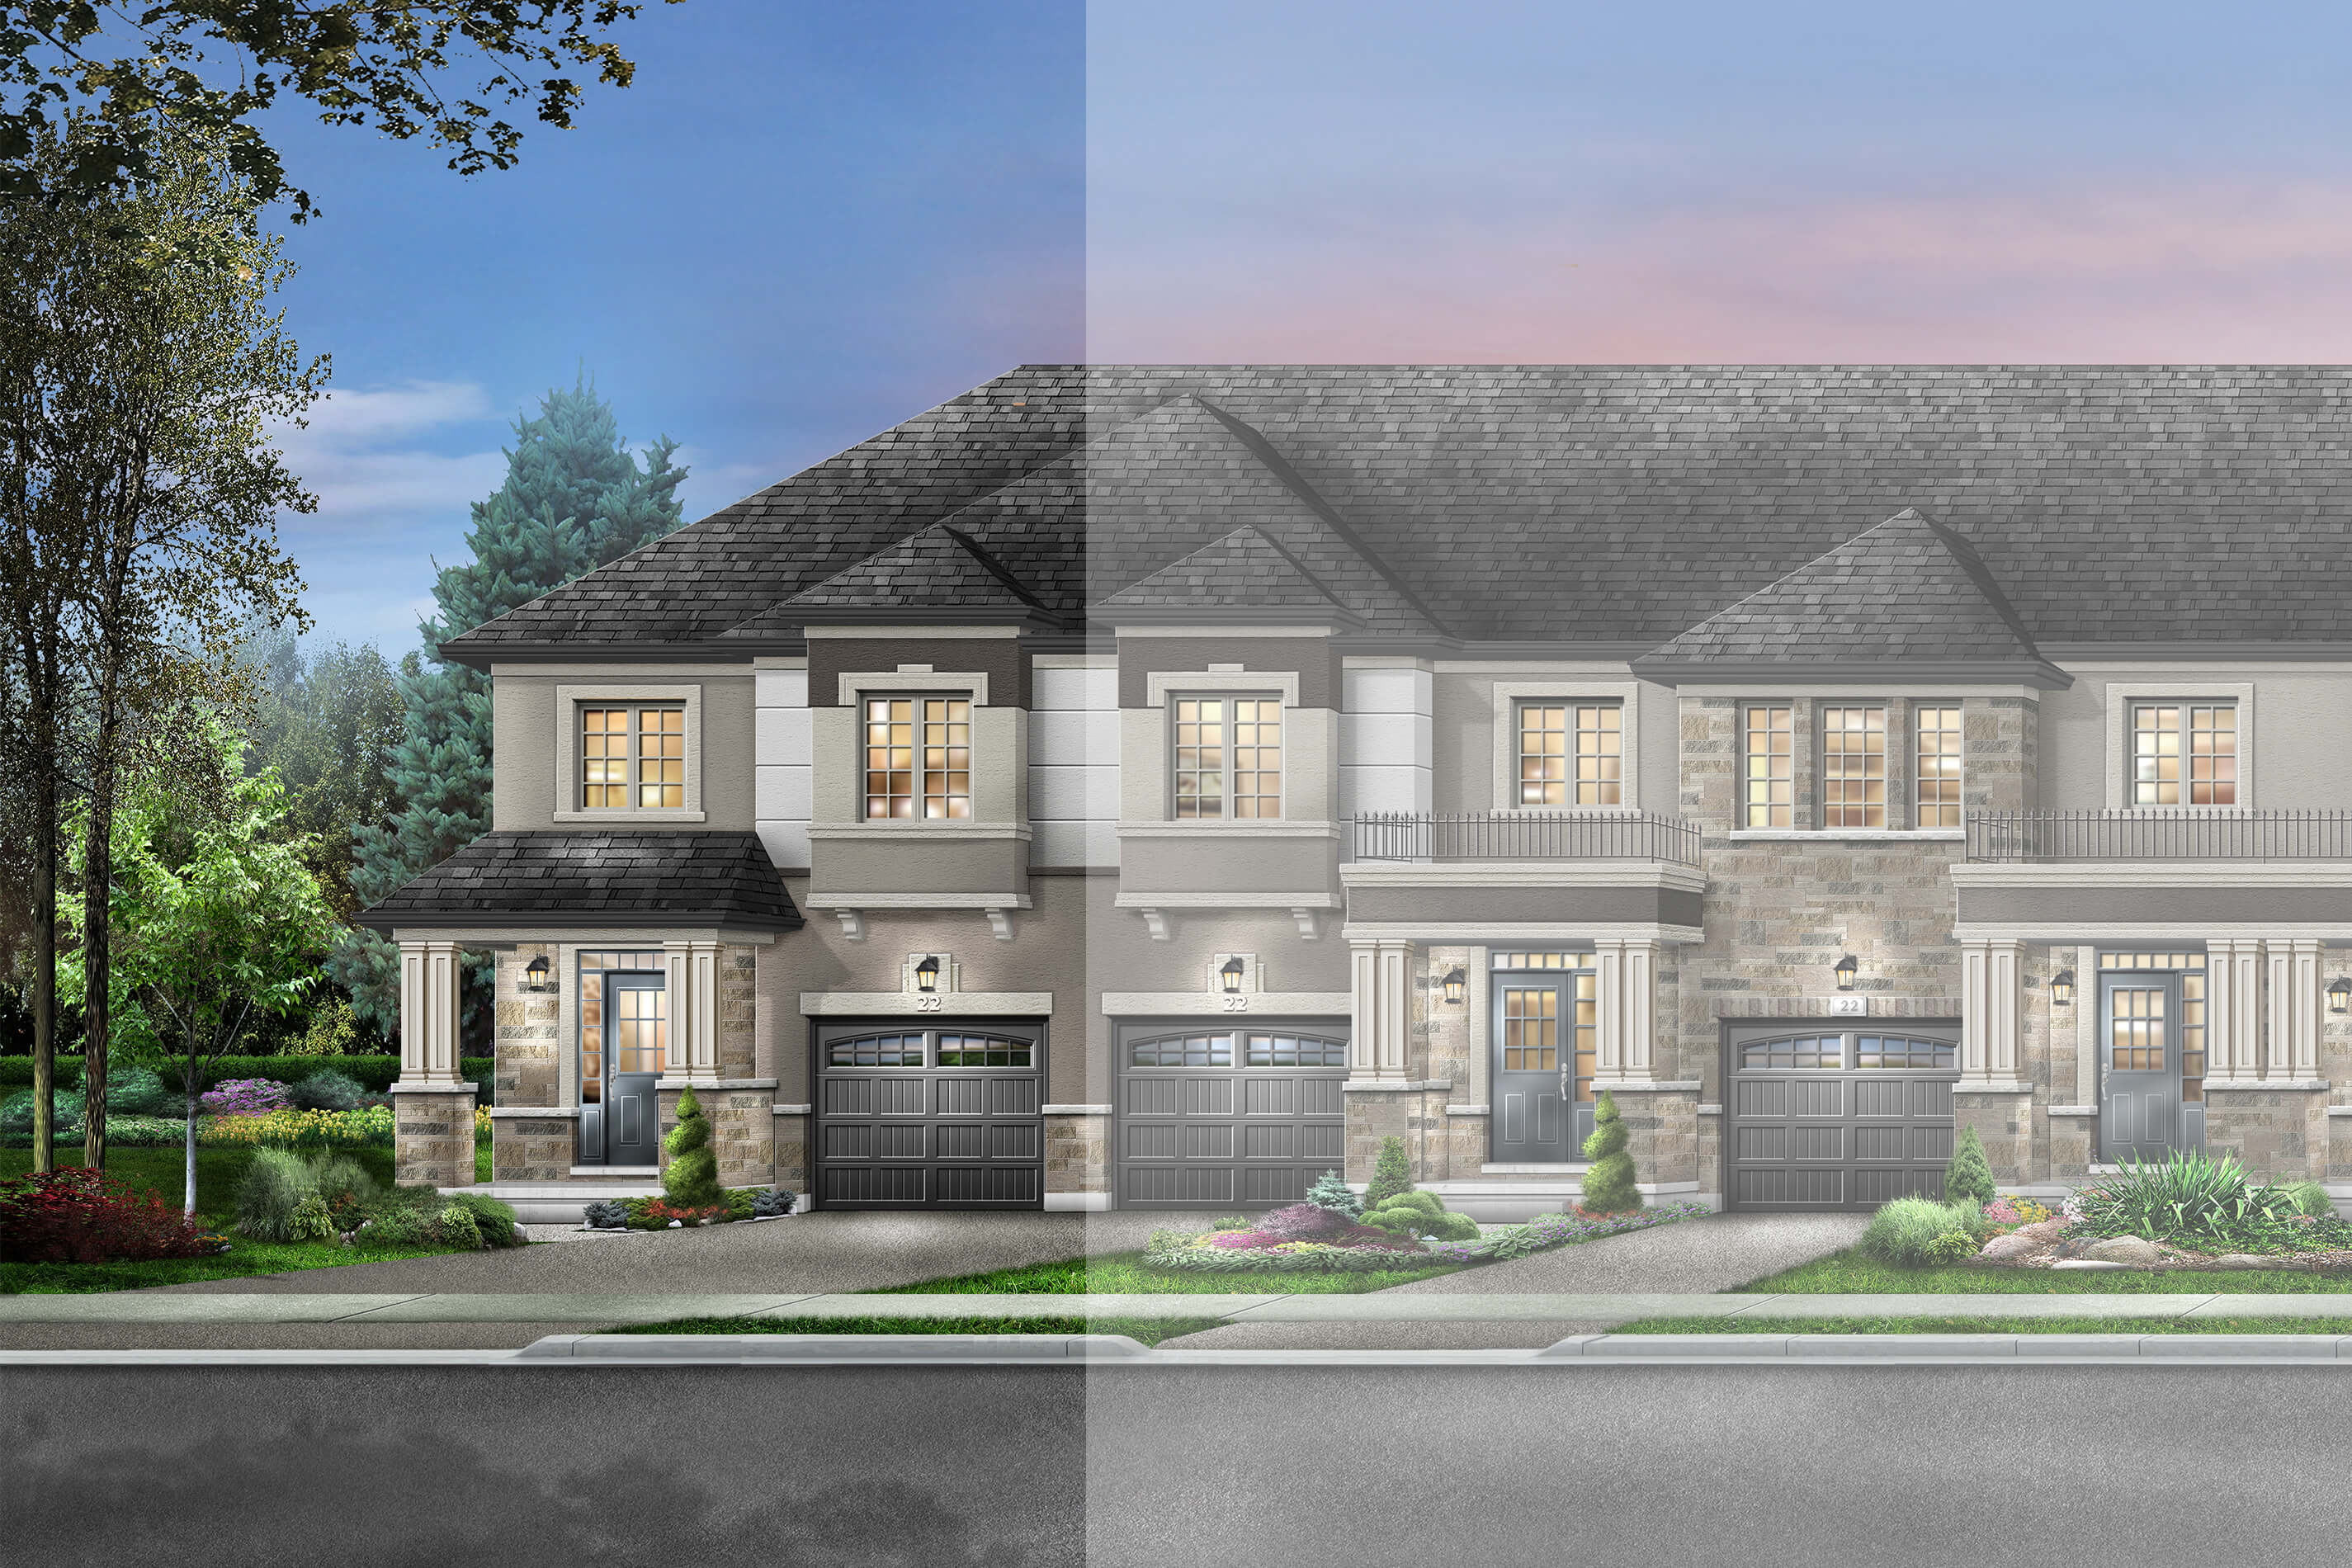 BRANTFORD BRANTVIEW HEIGHTS -NOW OPEN Freehold Towns $469,990 Detached $649,990- ..SOLD...